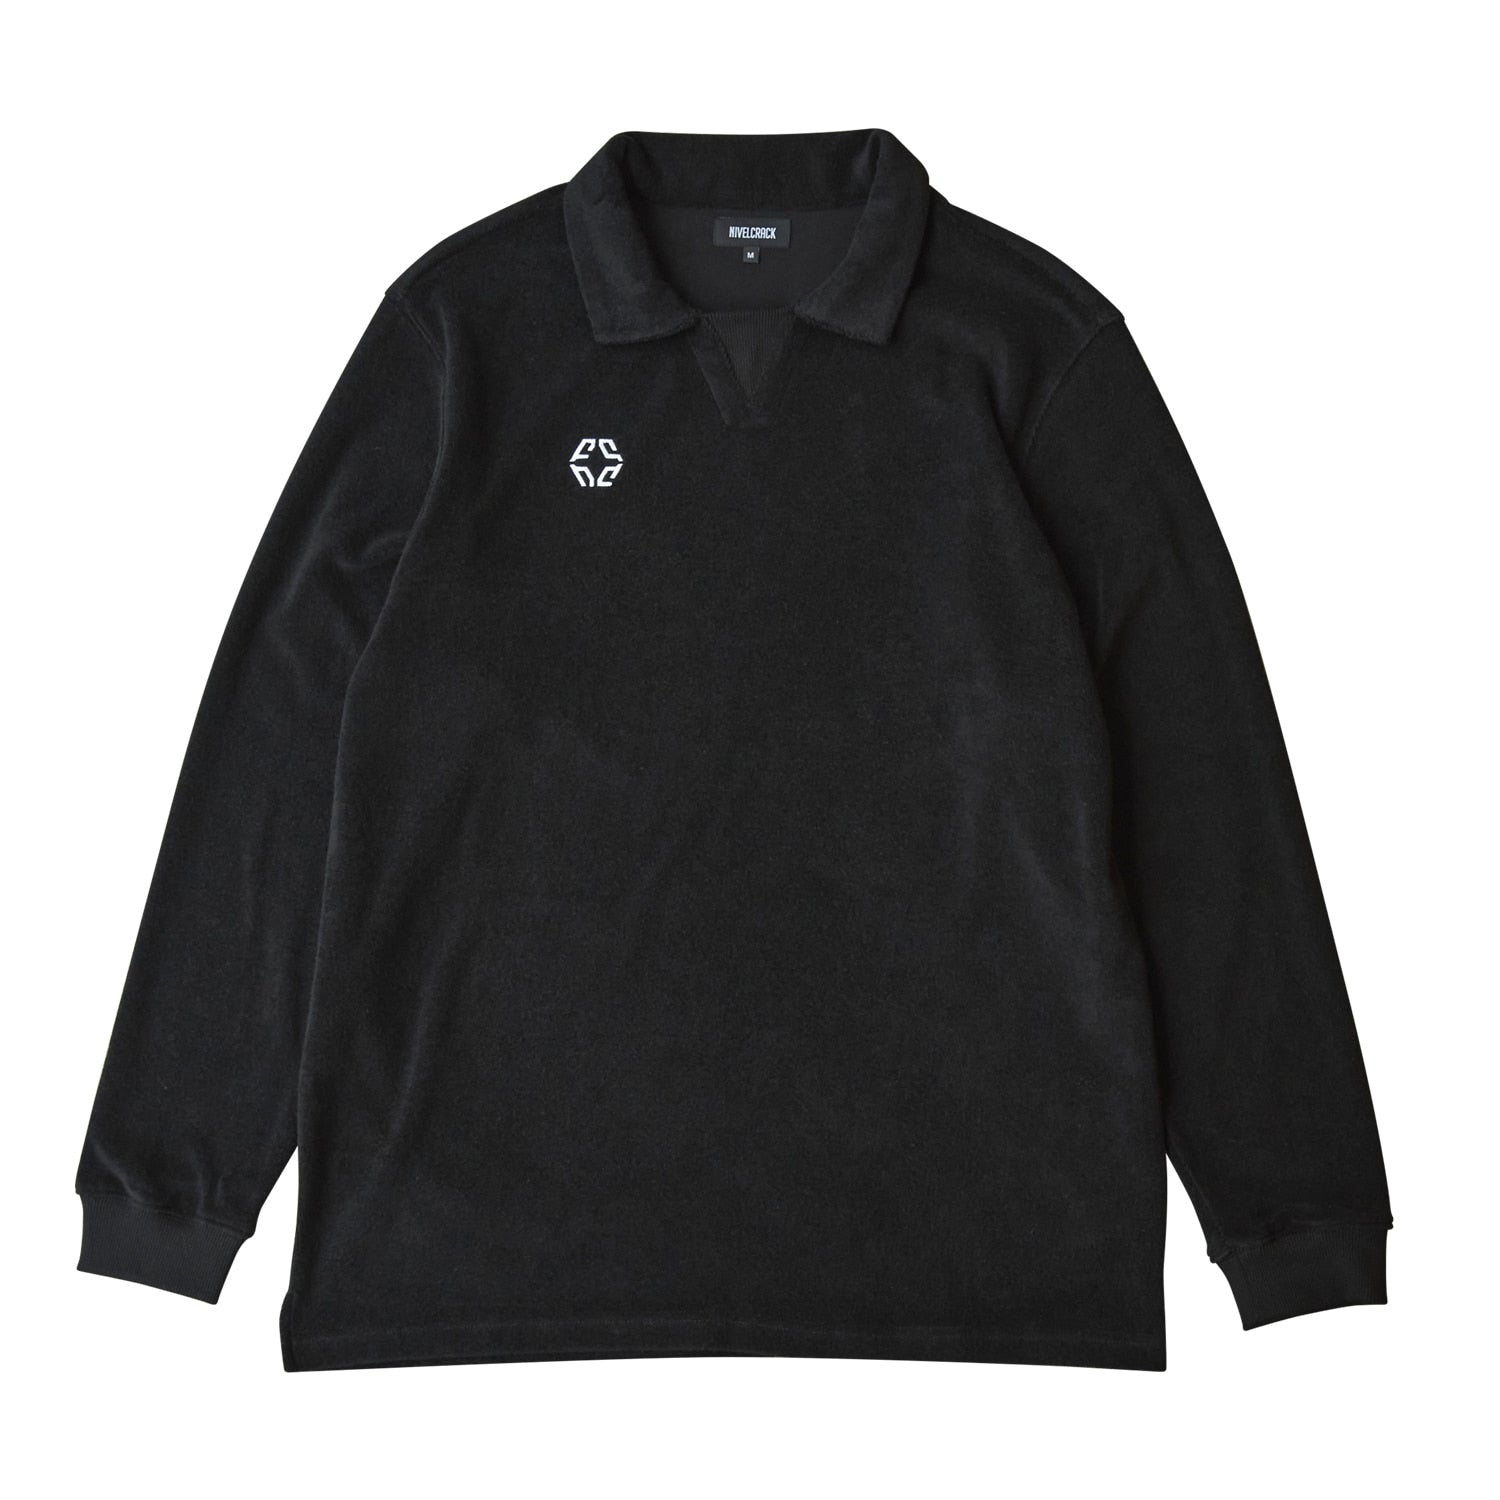 Nivelcrack Terry Drill Top - Black